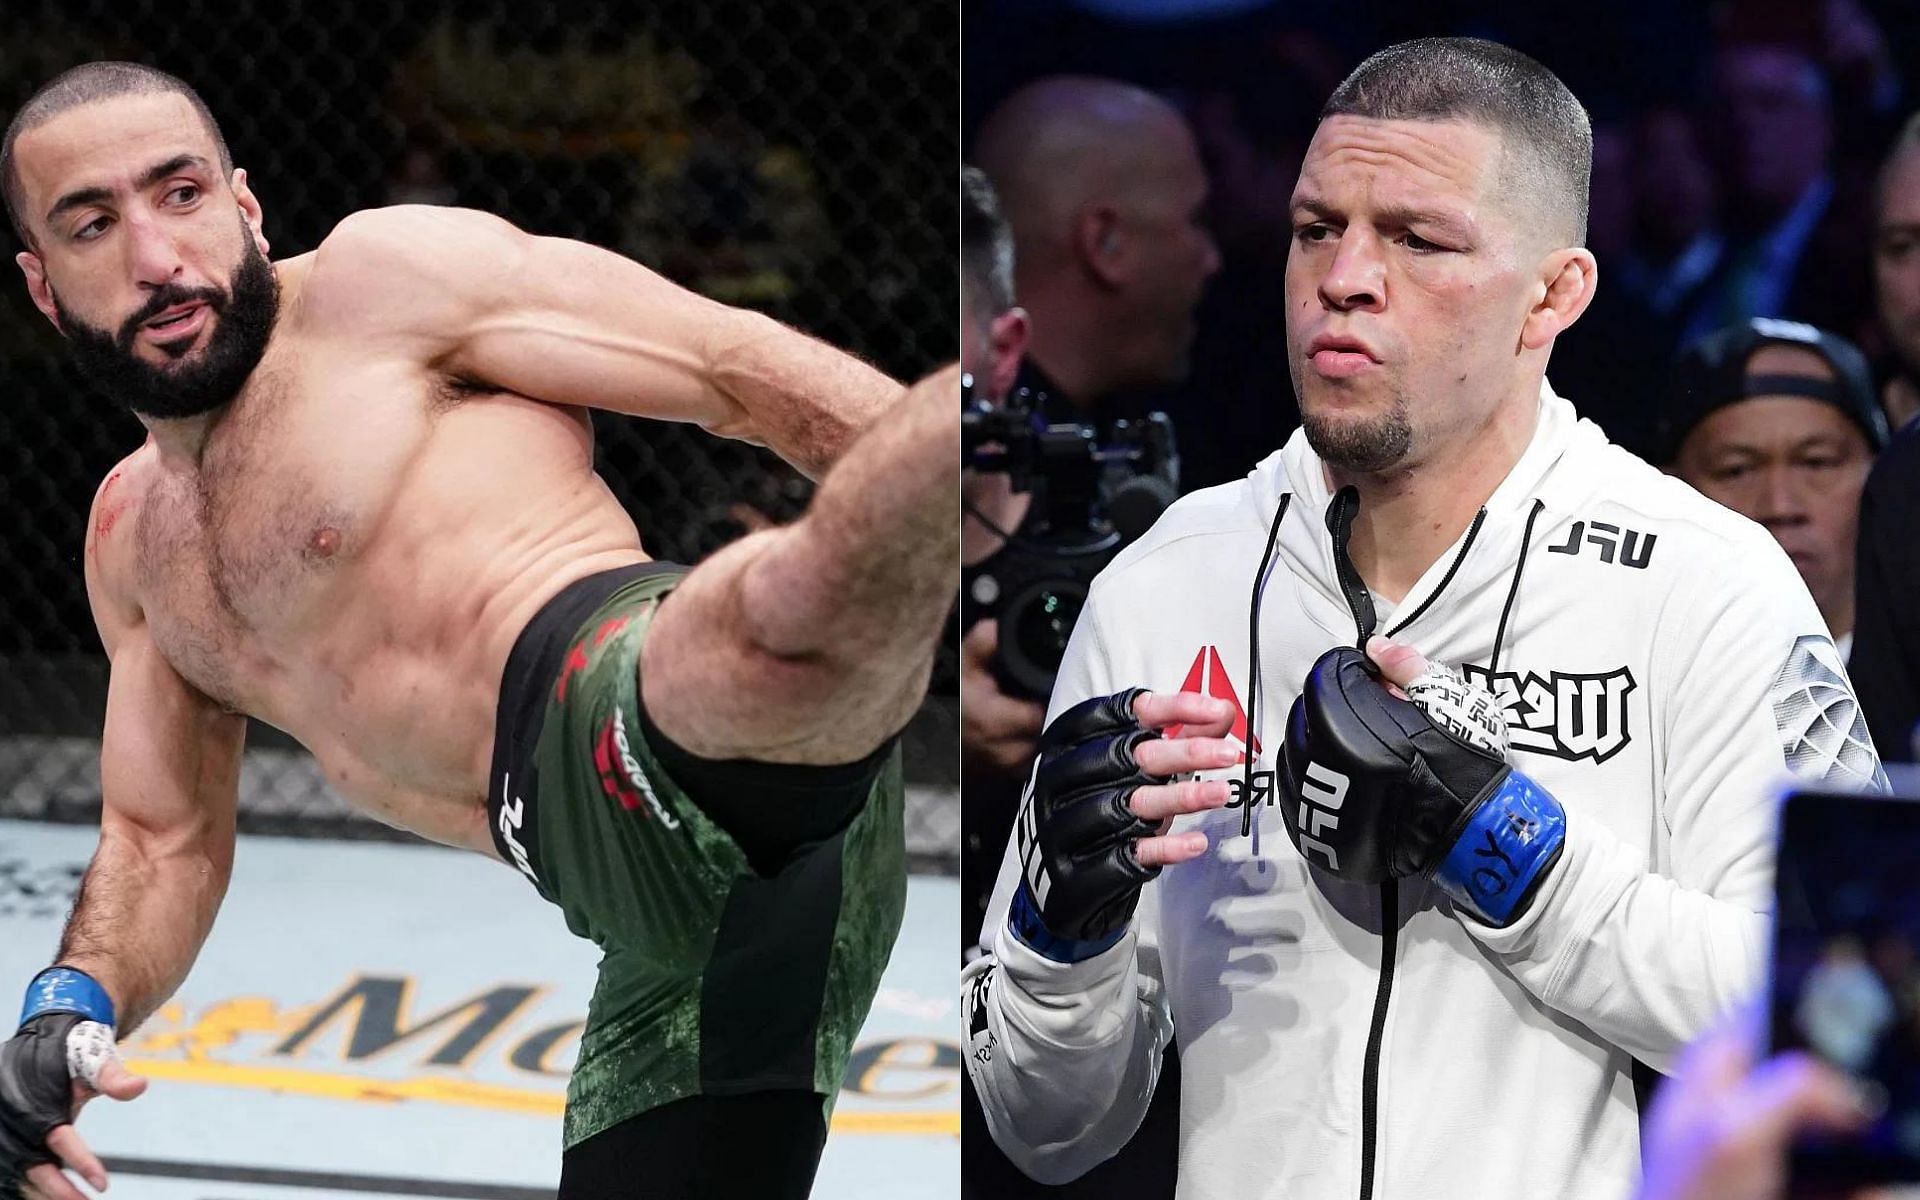 Belal Muhammad (left) and Nate Diaz (right)